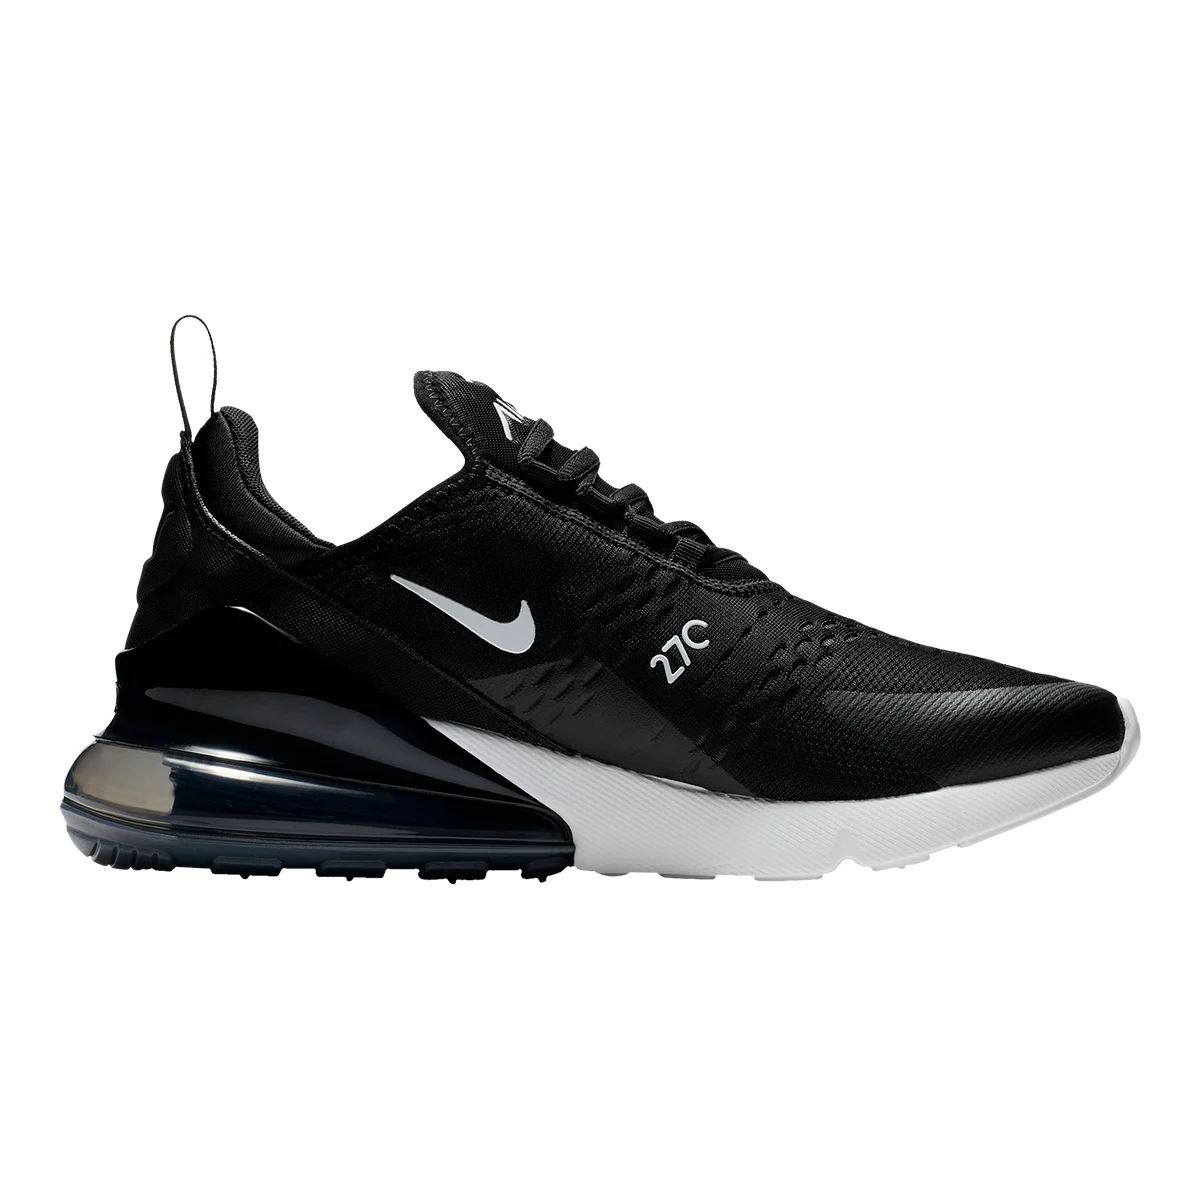 Nike Women's Air Max 270 Shoes Sneakers Cushioned